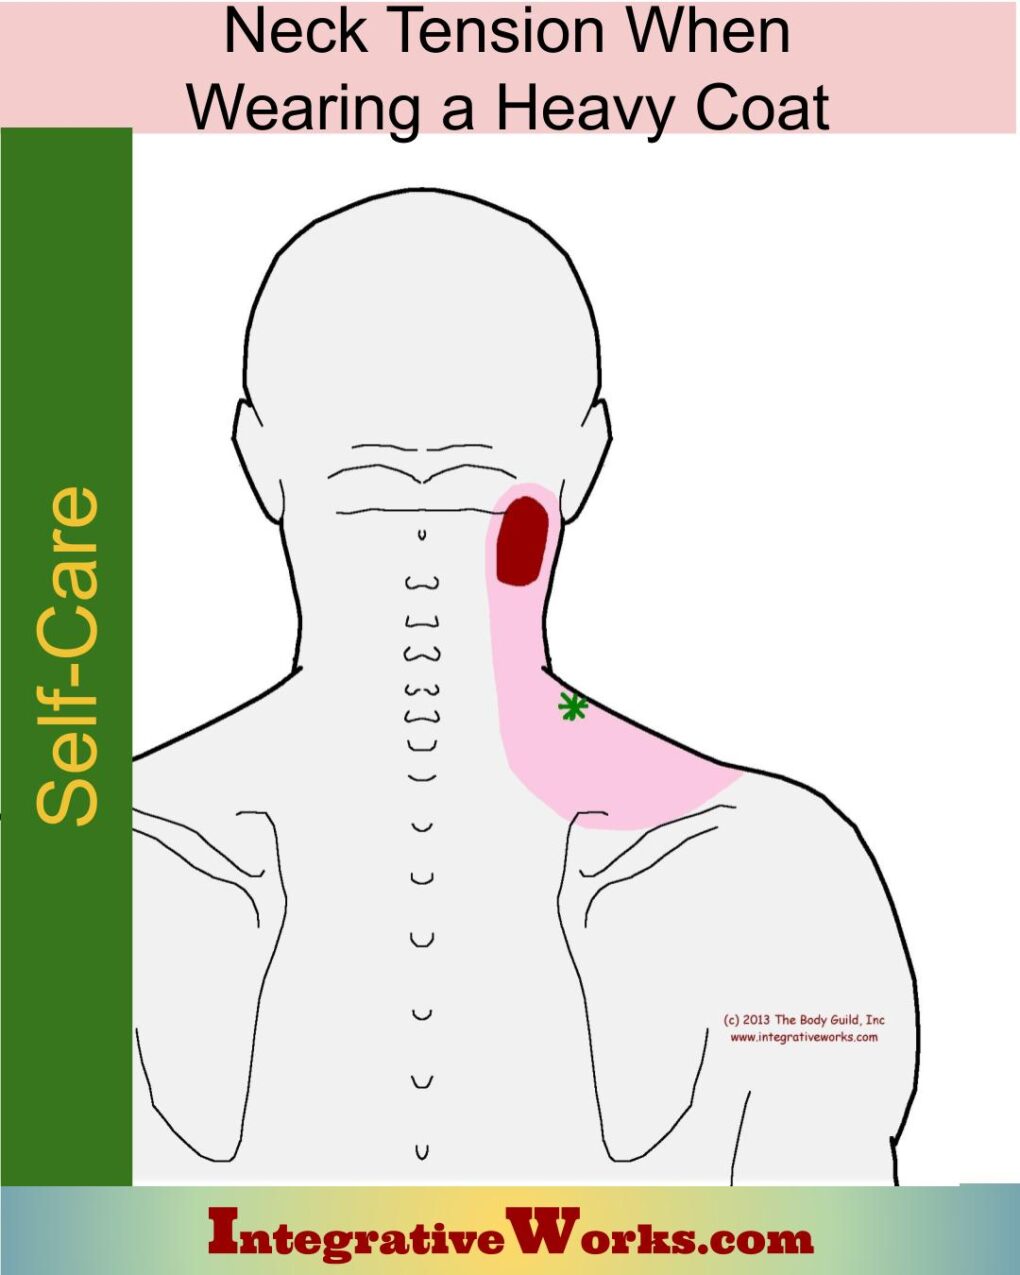 Neck Tension When Wearing a Heavy Coat - Integrative Works